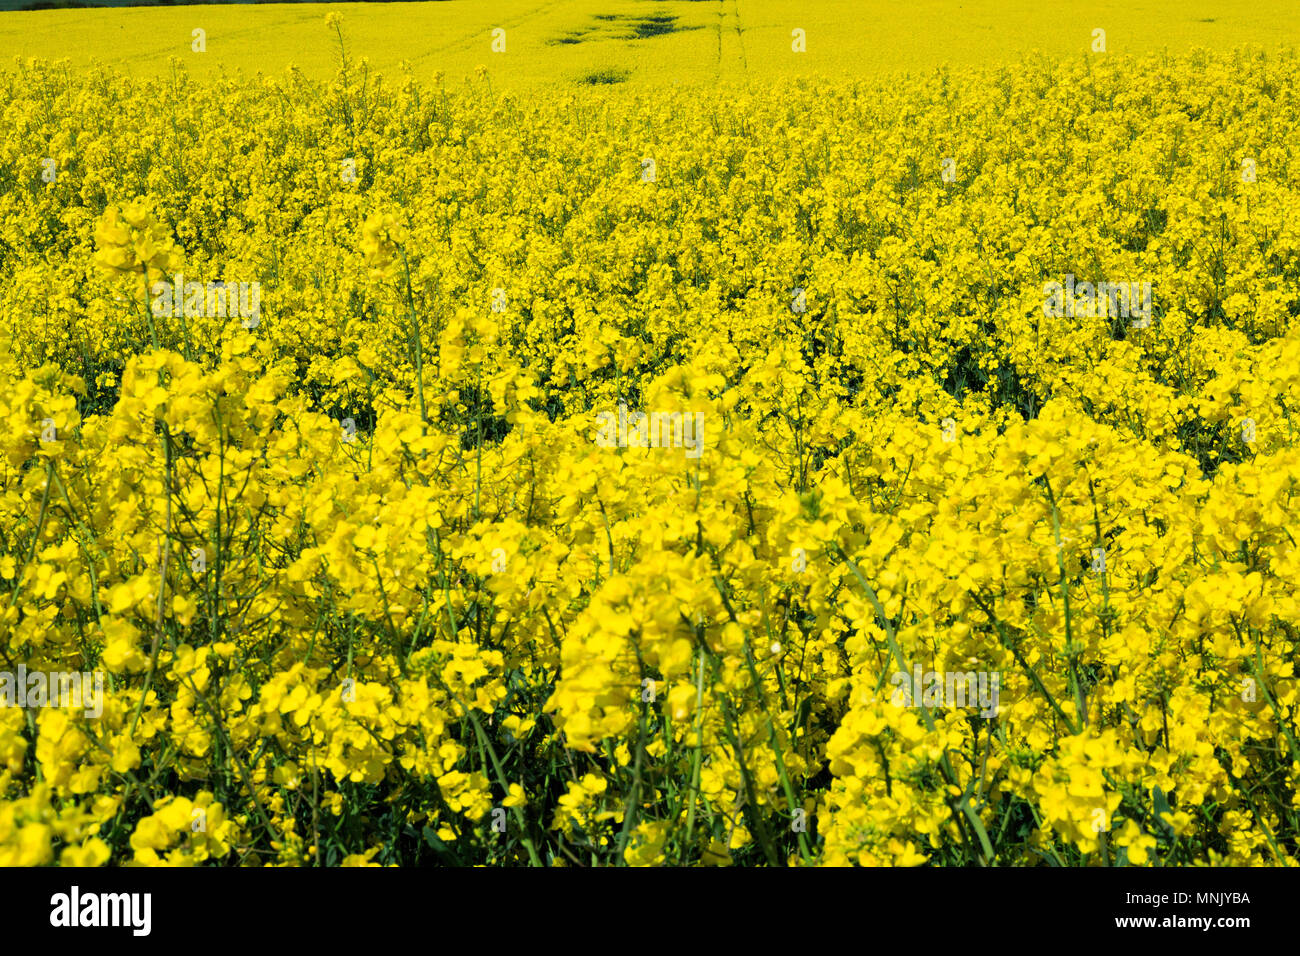 England, North Yorkshire, Rievaulx. Near River Rye. Fields of bright yellow Brassica Napus. Brassicaceae. Common name: Canola or Rapeseed.  Used for o Stock Photo